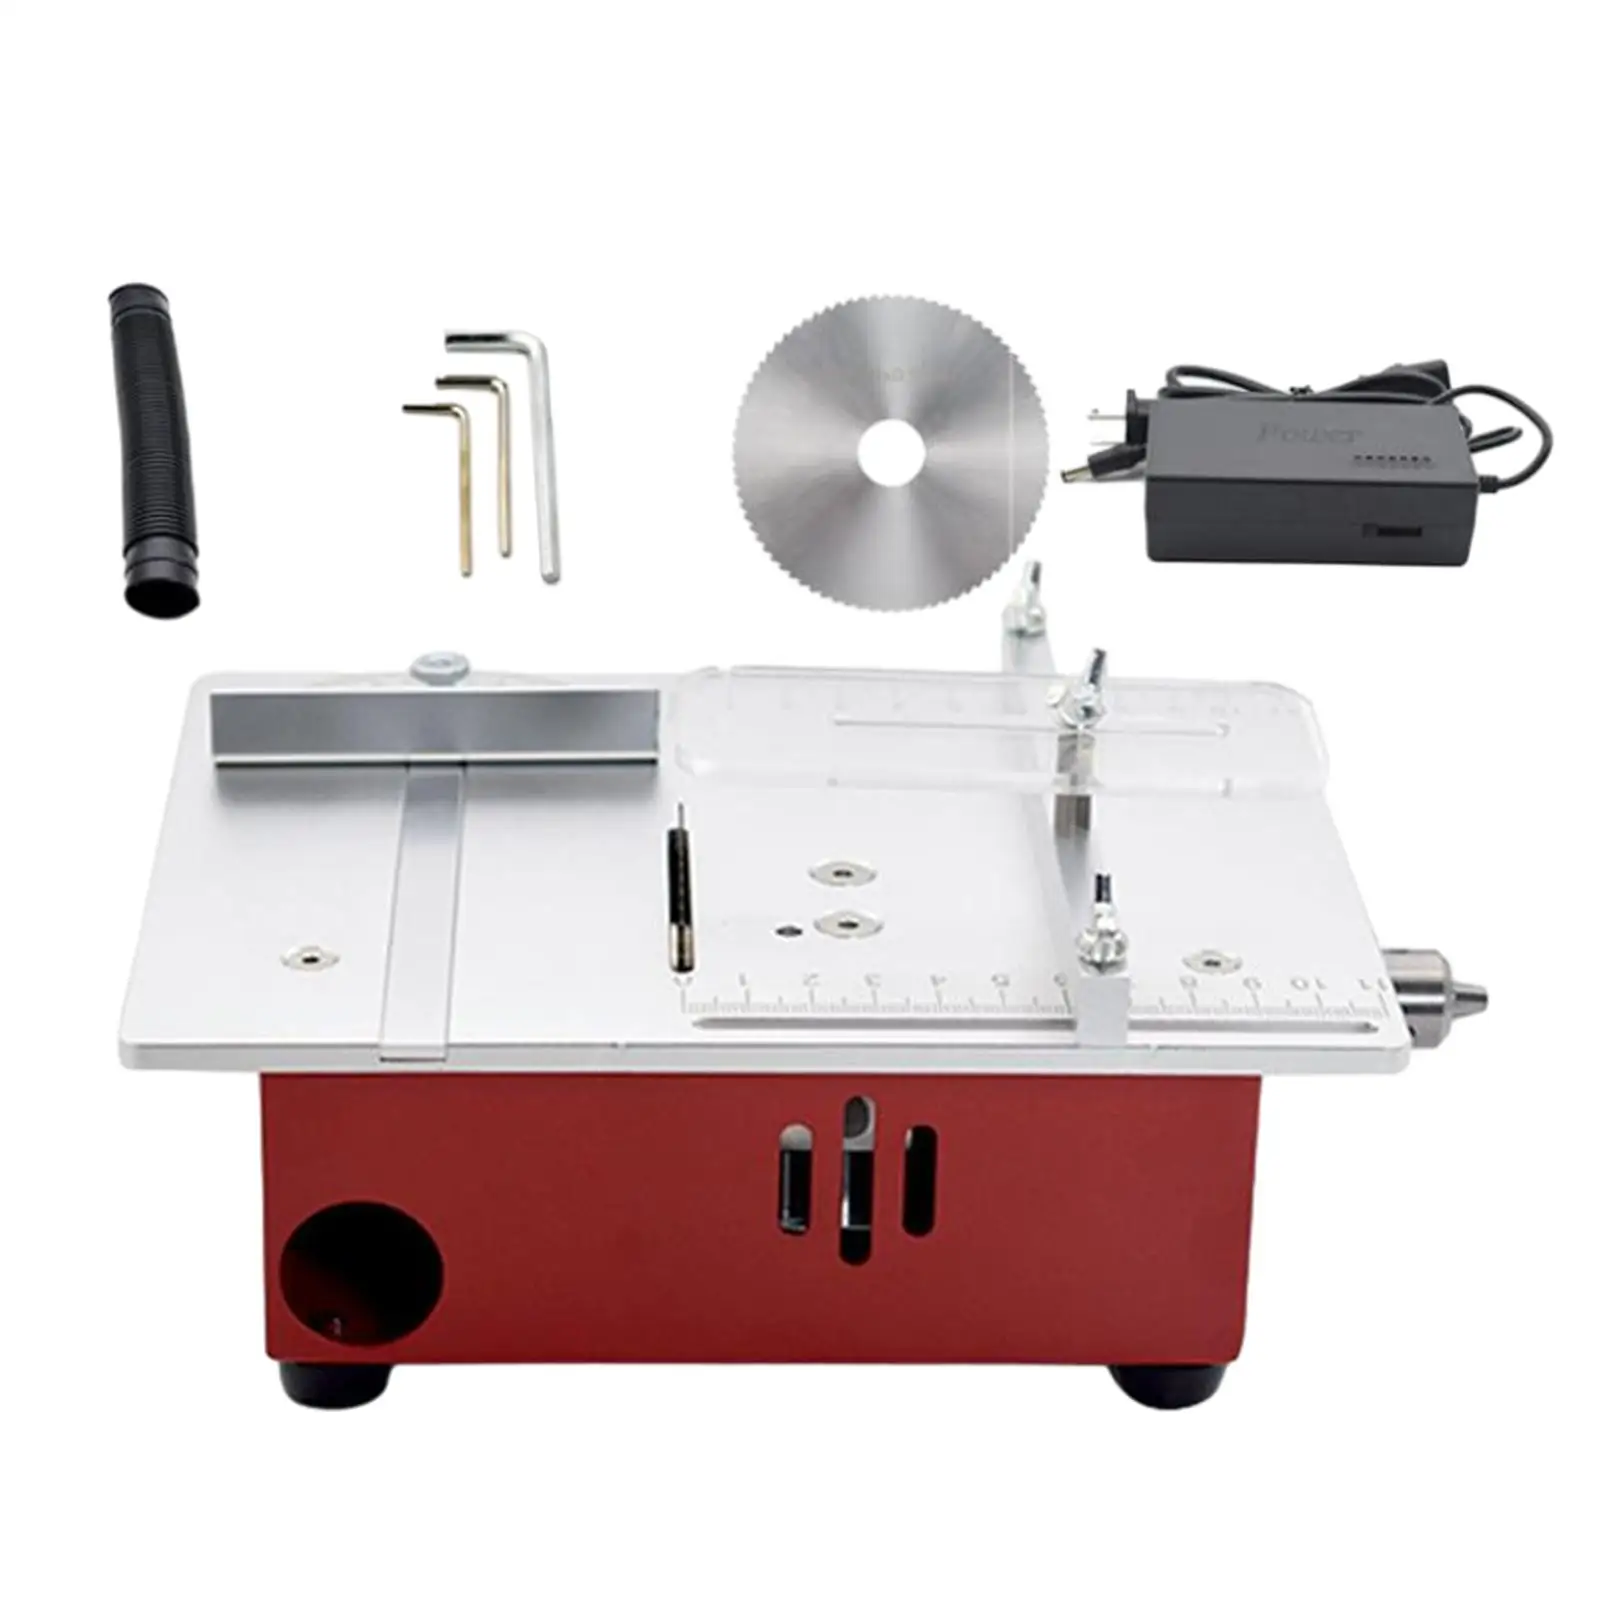 Mini Table Saw 7 Level Speed Electric Cutting Machine for Plastic Wood Aluminum Copper Acrylic Cutting Miniature Wood Crafts